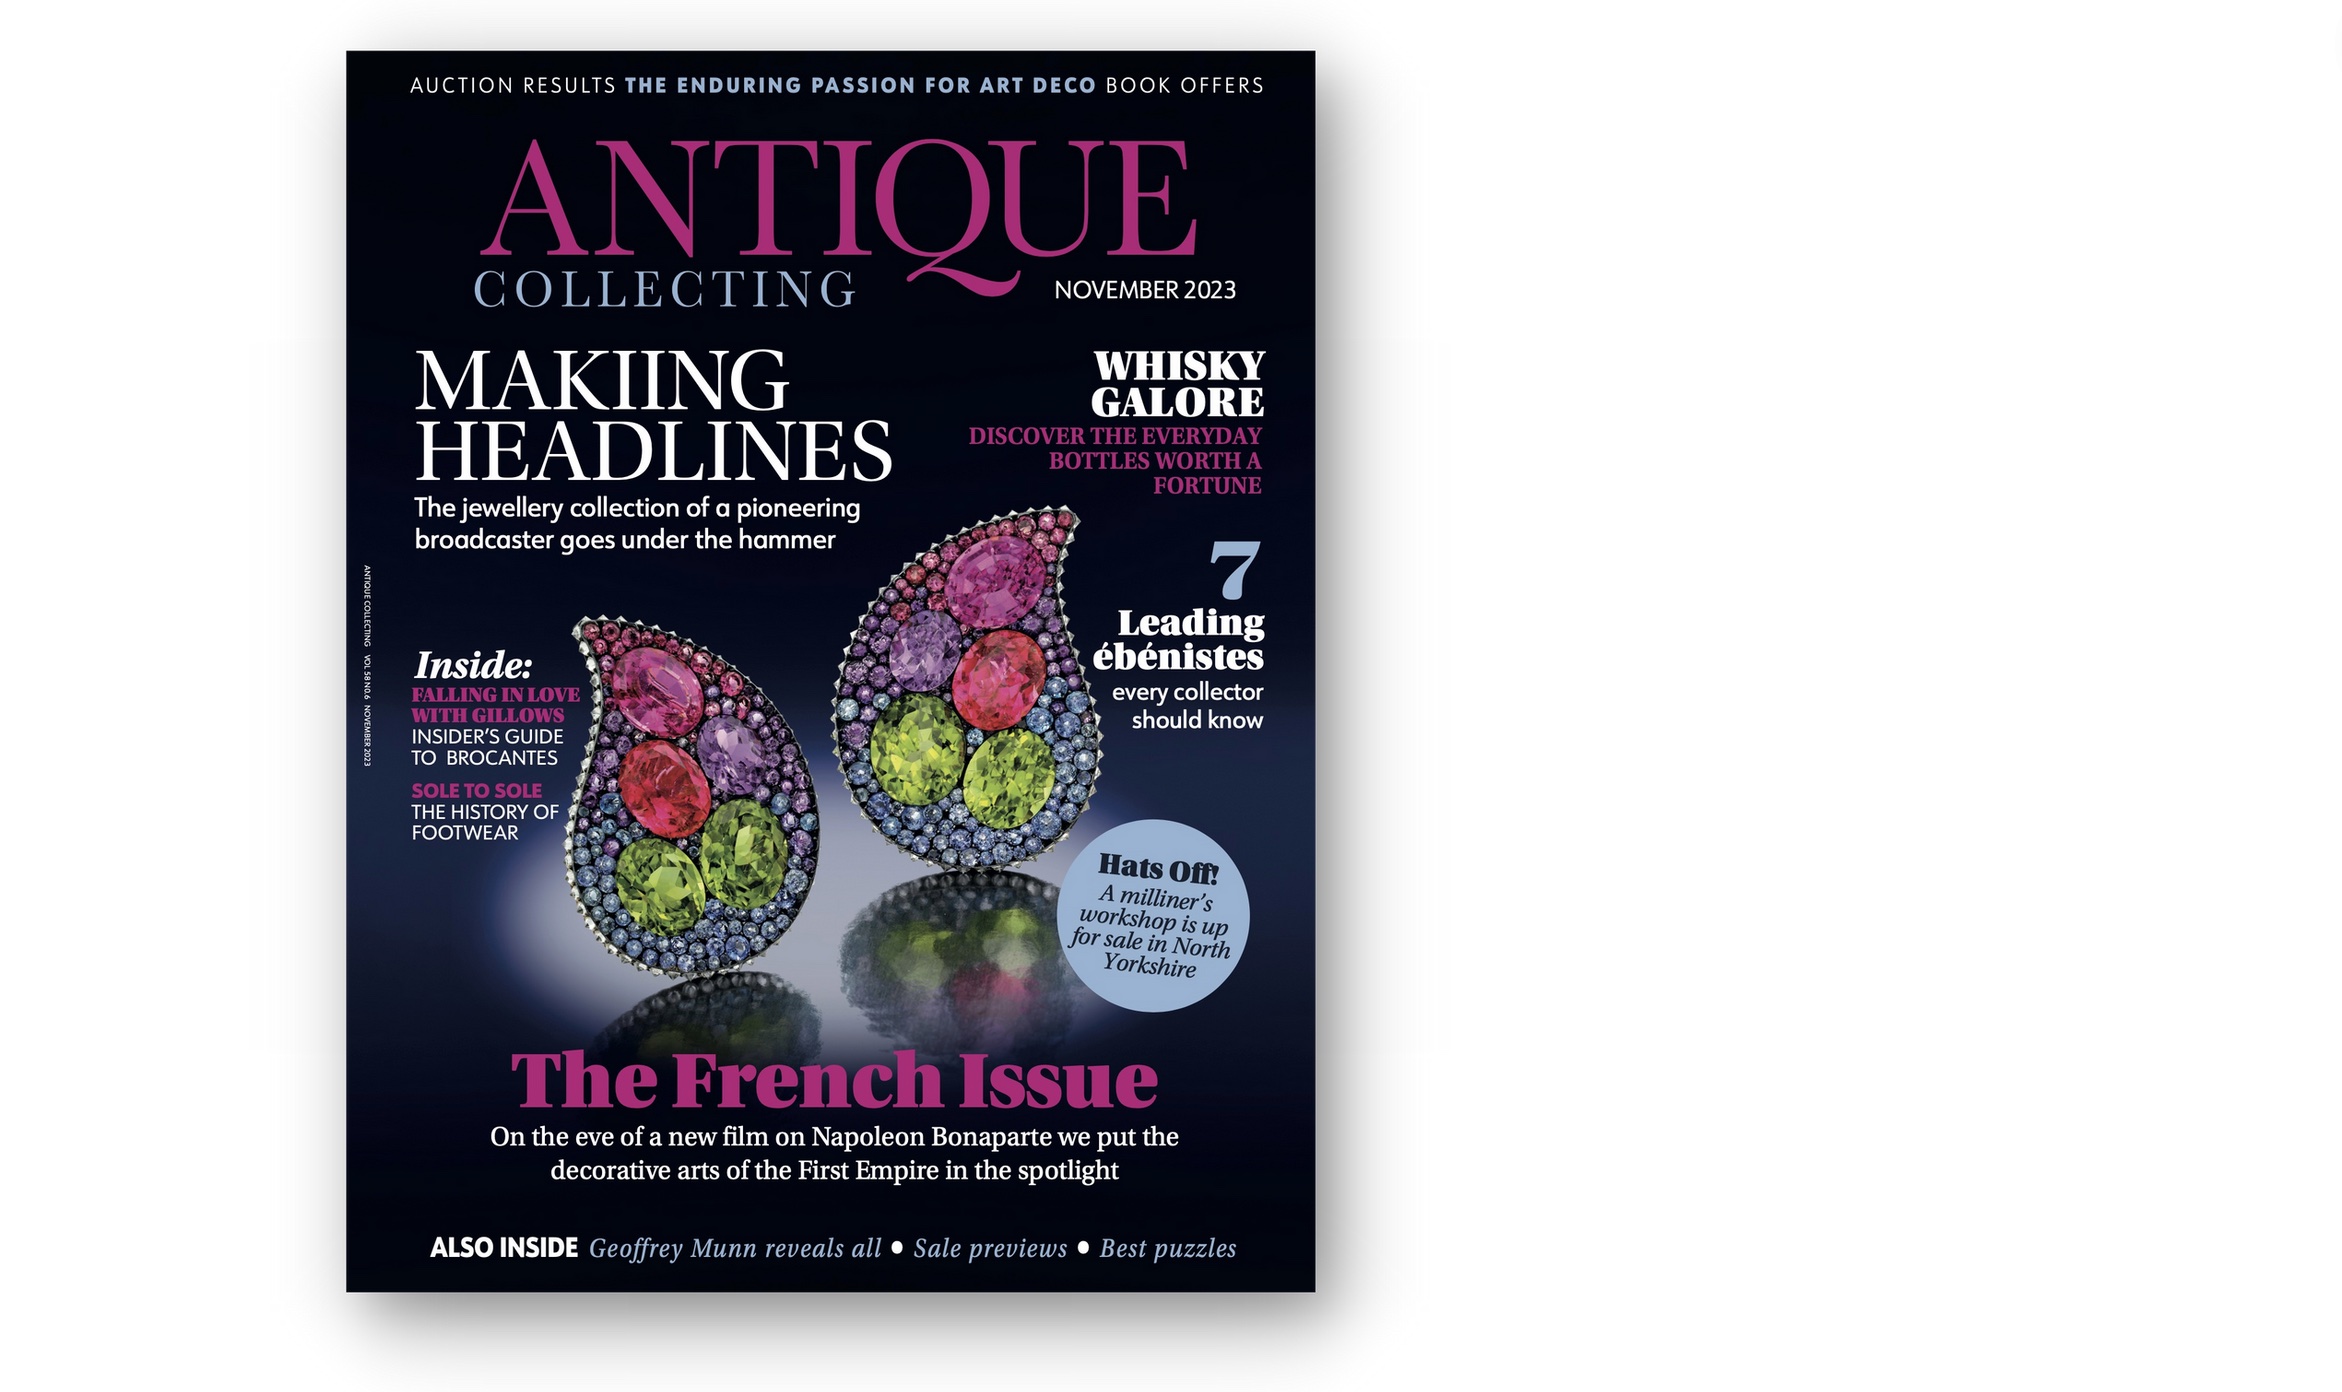 See inside latest Antique Collecting magazine – Antique Collecting